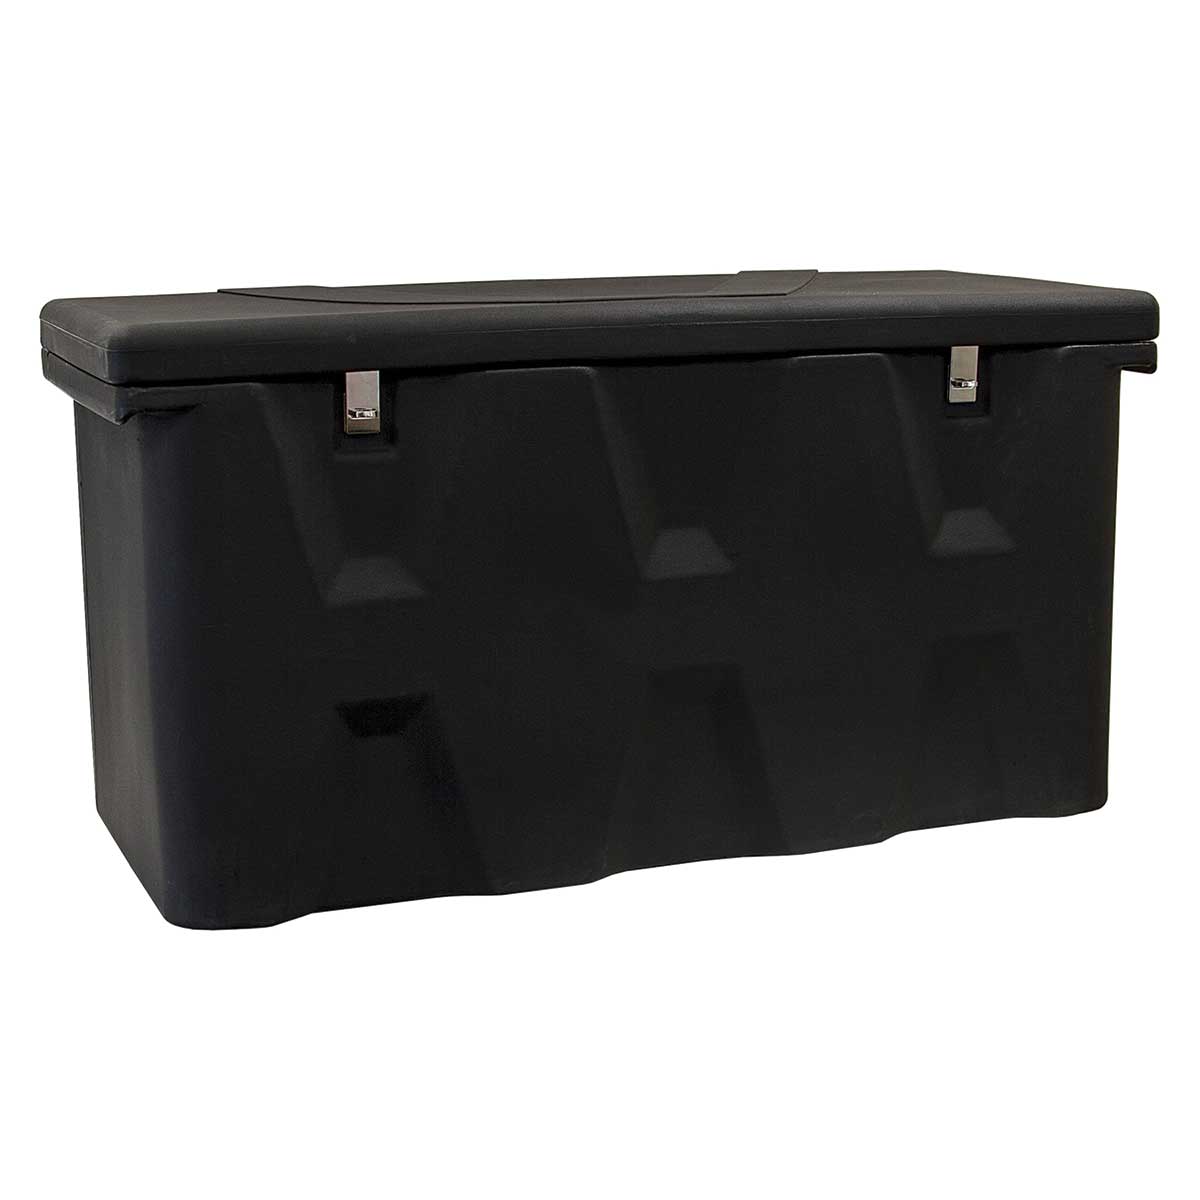 Buyers Products Poly Multipurpose Chest, 51" L x 23" W x 26" H